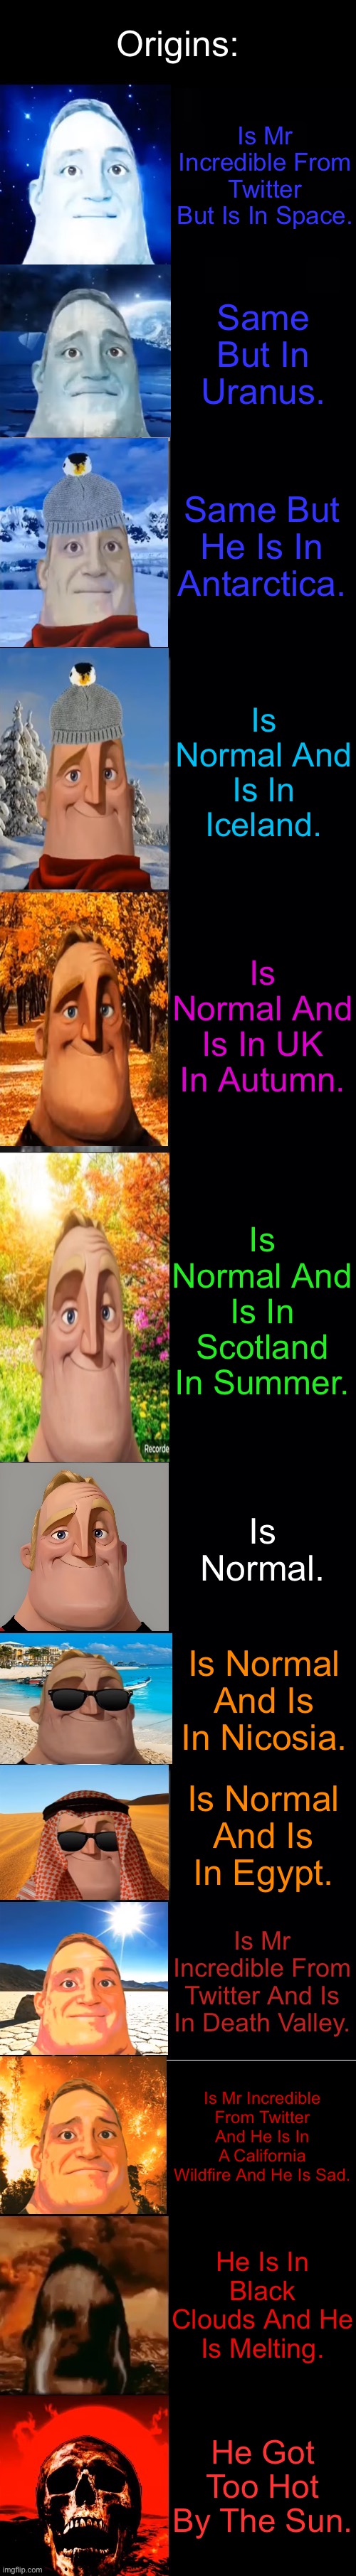 Mr Incredible Becoming Cold To Hot | Origins:; Is Mr Incredible From Twitter But Is In Space. Same But In Uranus. Same But He Is In Antarctica. Is Normal And Is In Iceland. Is Normal And Is In UK In Autumn. Is Normal And Is In Scotland In Summer. Is Normal. Is Normal And Is In Nicosia. Is Normal And Is In Egypt. Is Mr Incredible From Twitter And Is In Death Valley. Is Mr Incredible From Twitter And He Is In A California Wildfire And He Is Sad. He Is In Black Clouds And He Is Melting. He Got Too Hot By The Sun. | image tagged in mr incredible becoming cold to hot | made w/ Imgflip meme maker